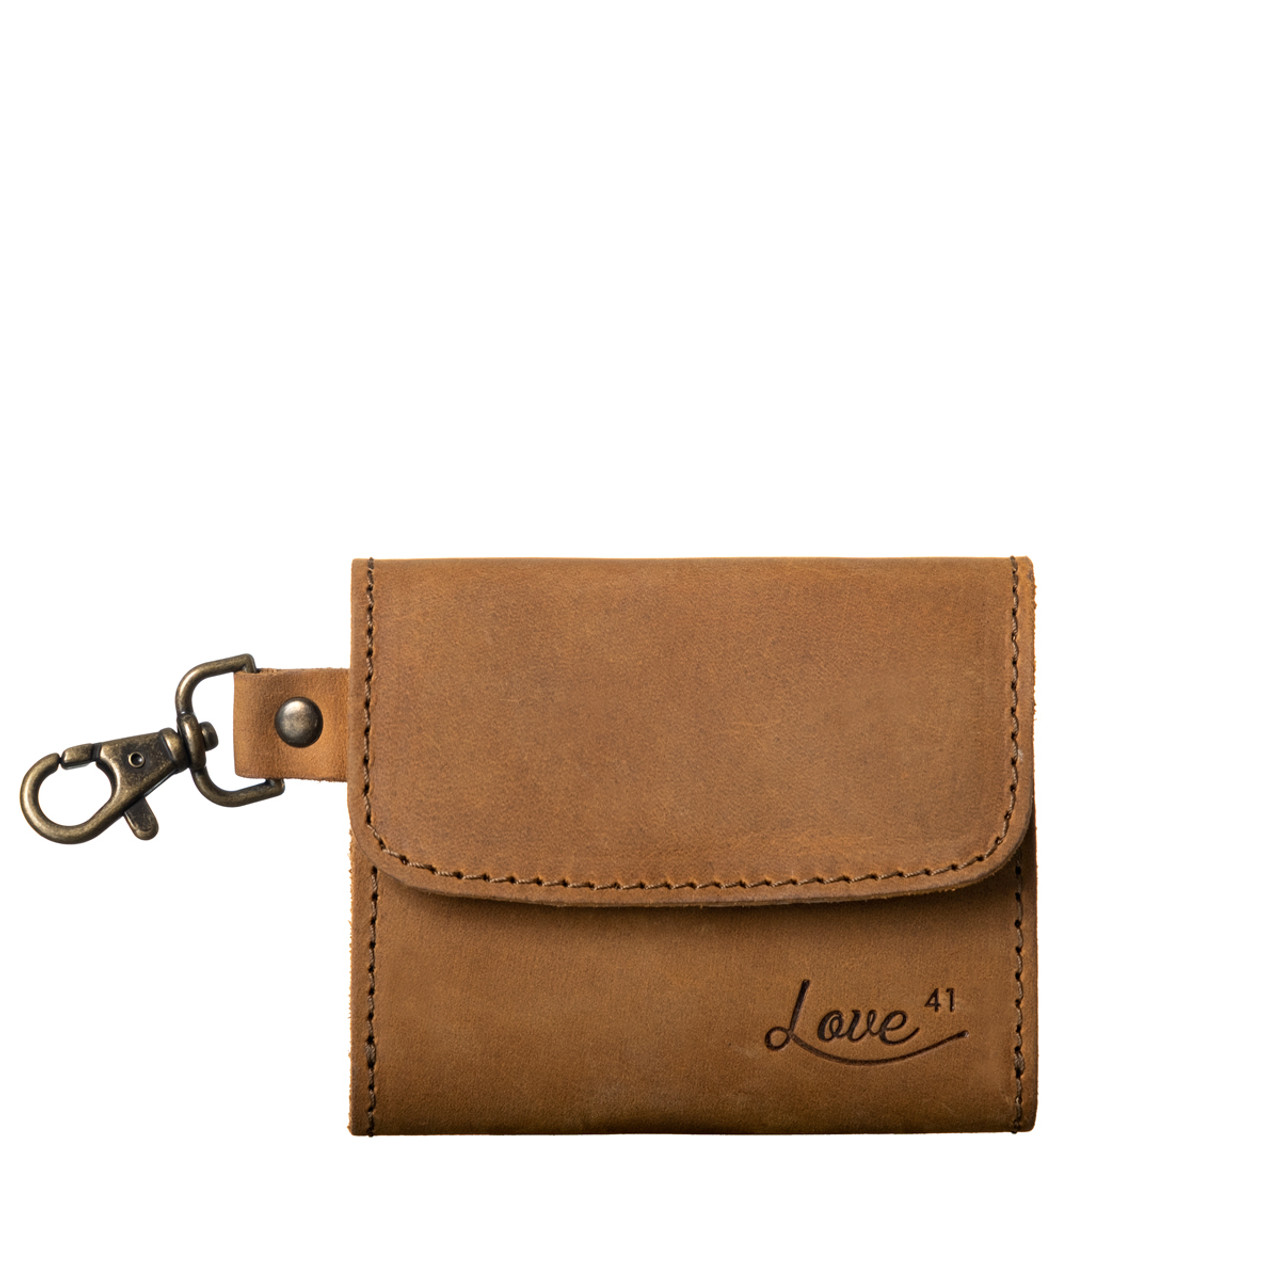 Leather Key Pouches in different colors - The Chesterfield Brand - The  Chesterfield Brand